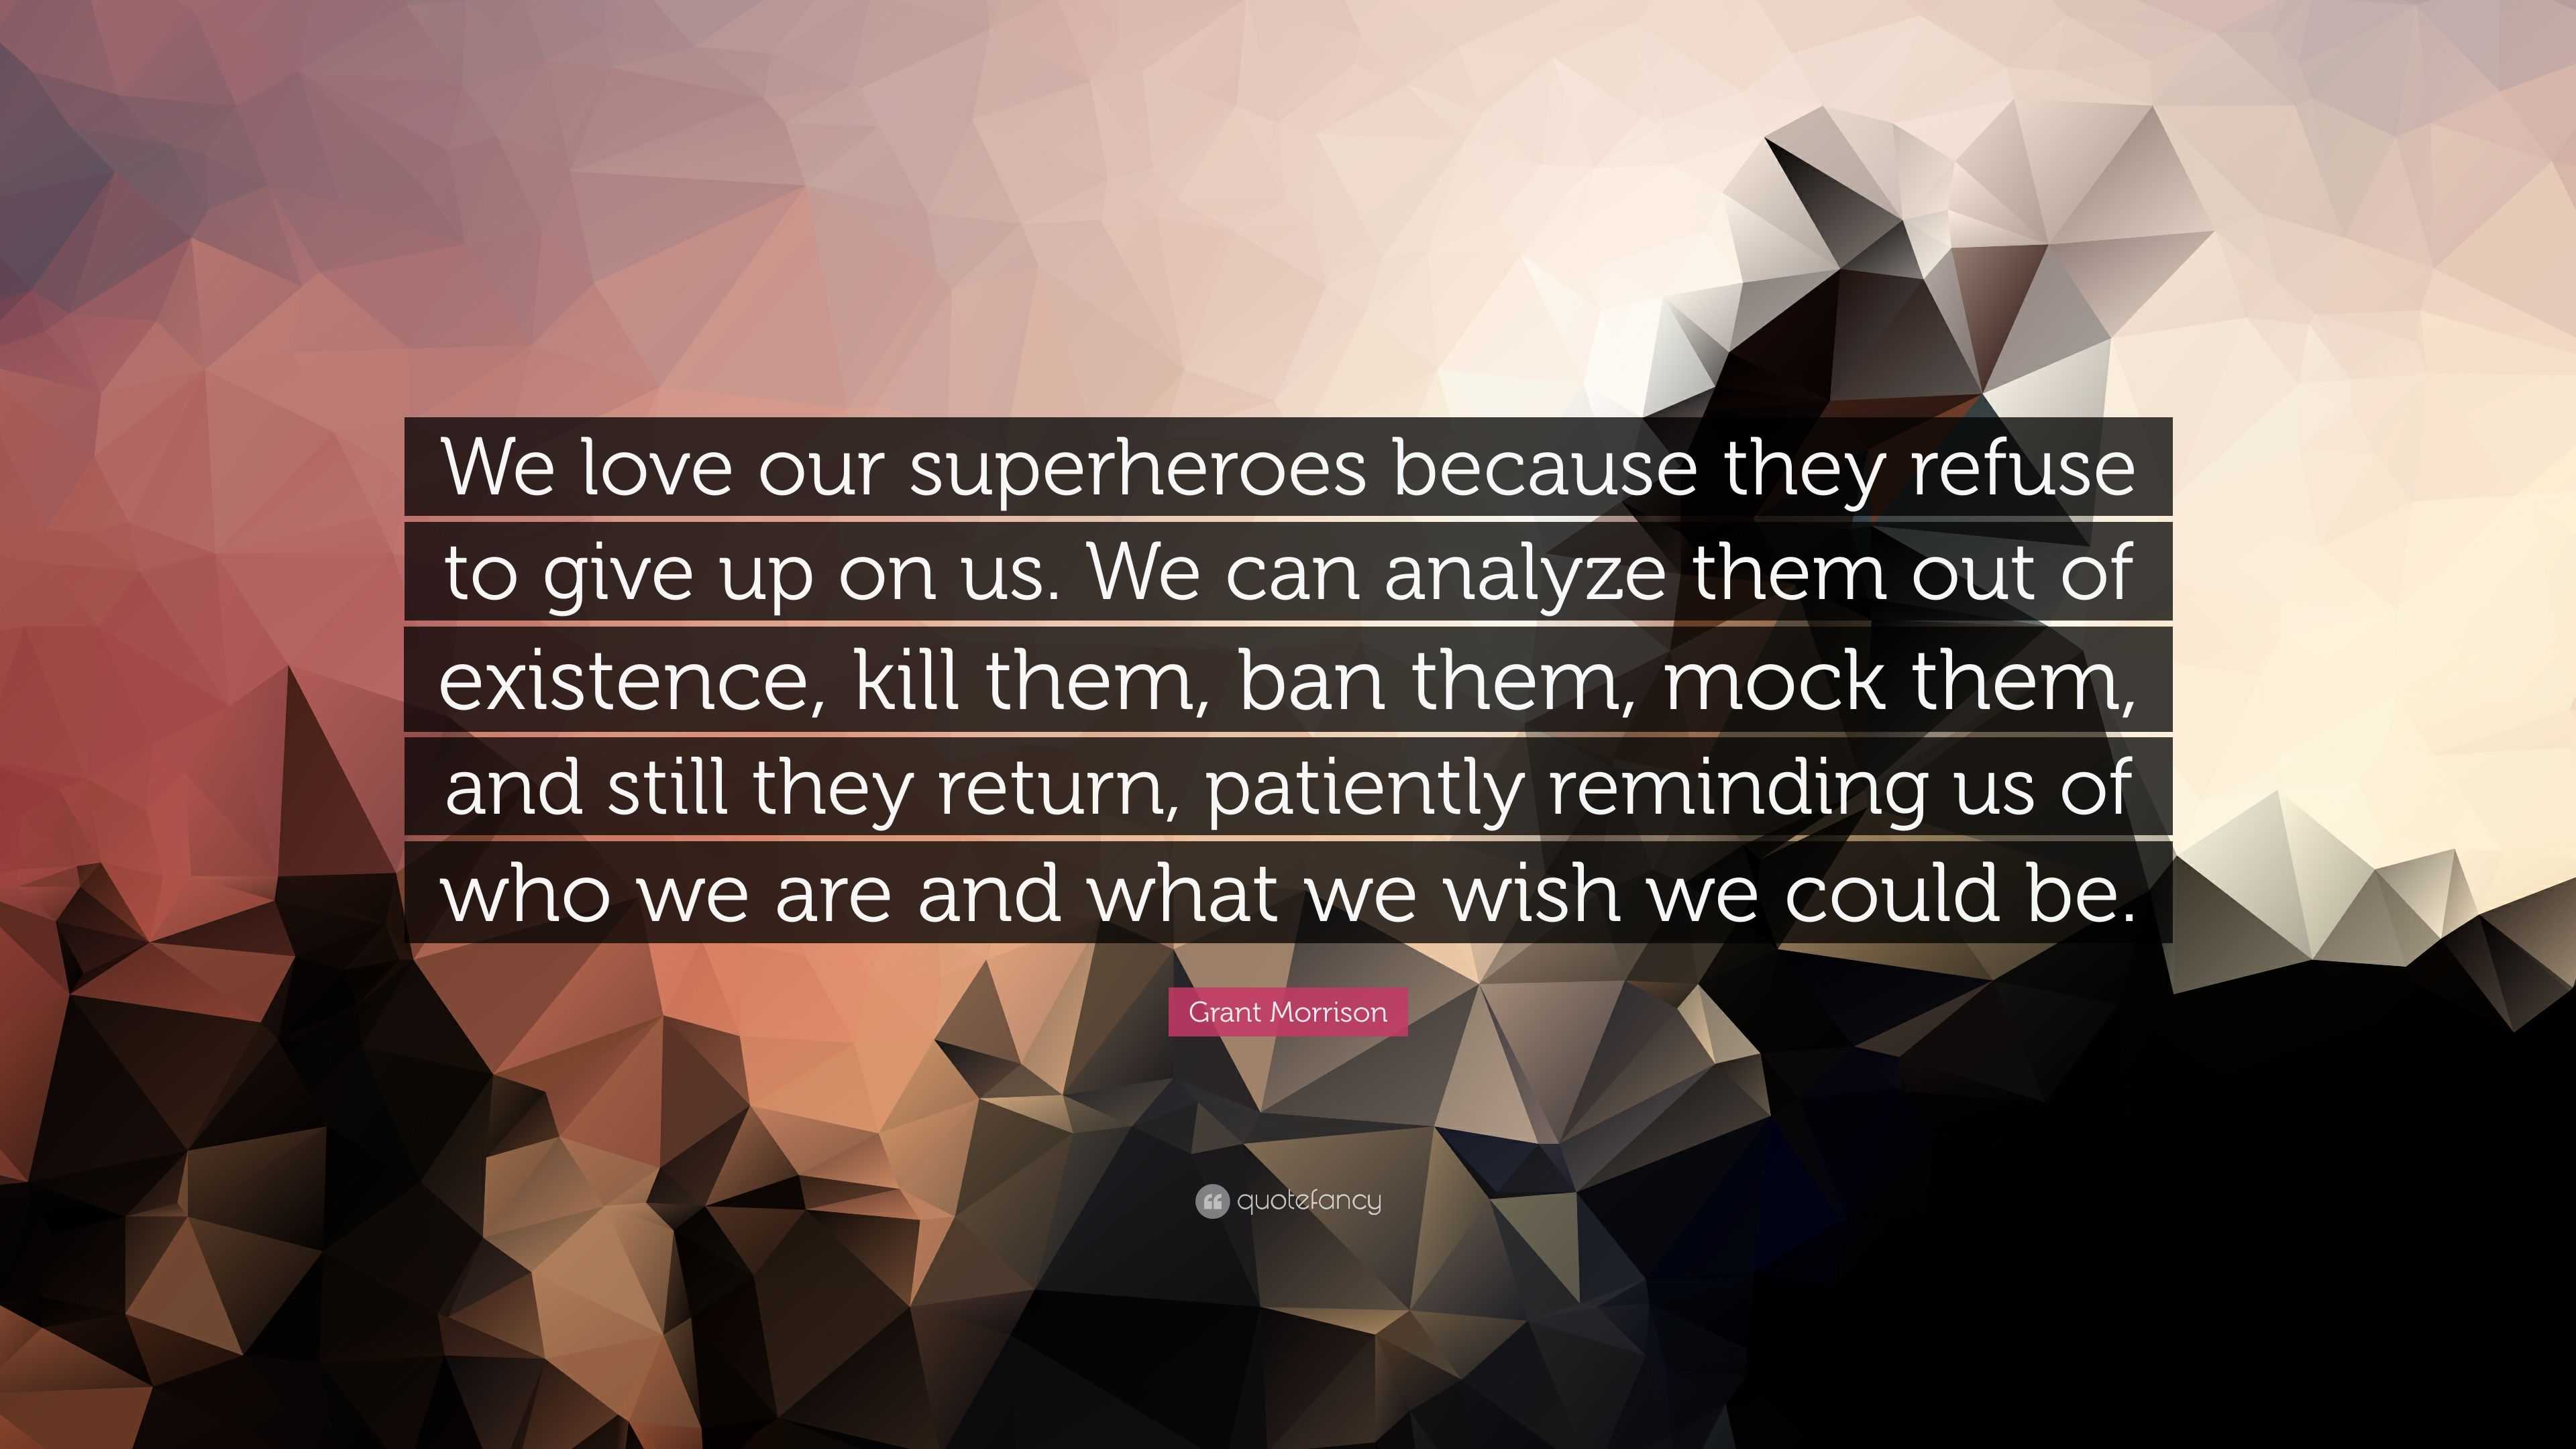 https://quotefancy.com/media/wallpaper/3840x2160/3907135-Grant-Morrison-Quote-We-love-our-superheroes-because-they-refuse.jpg